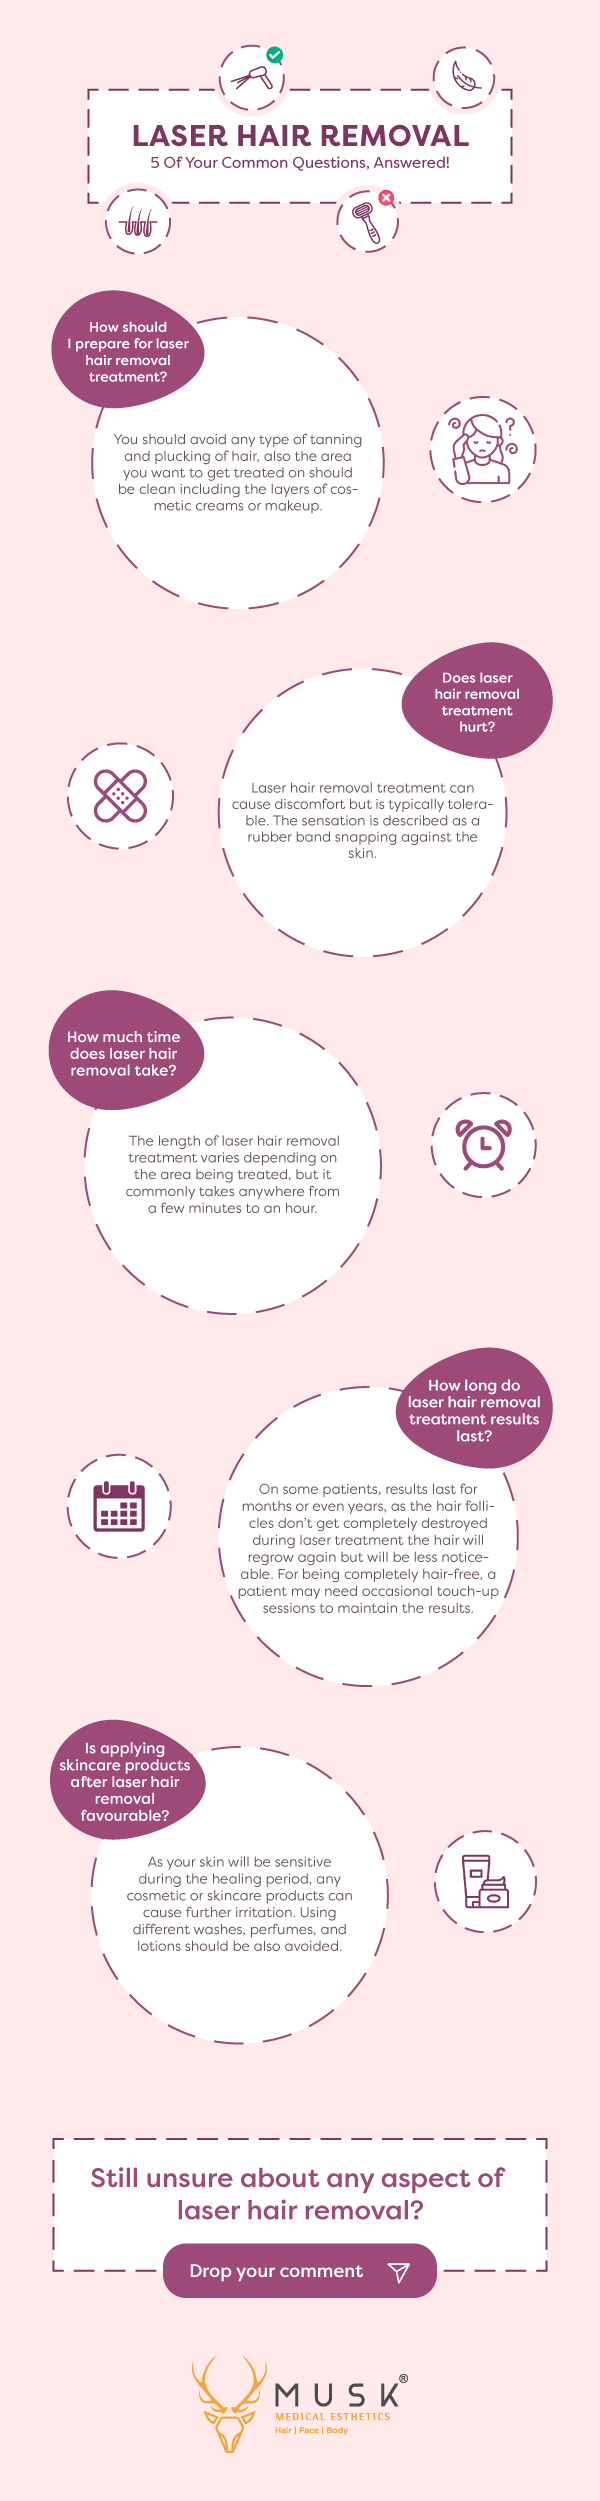 Laser-Hair-Removal-infographic